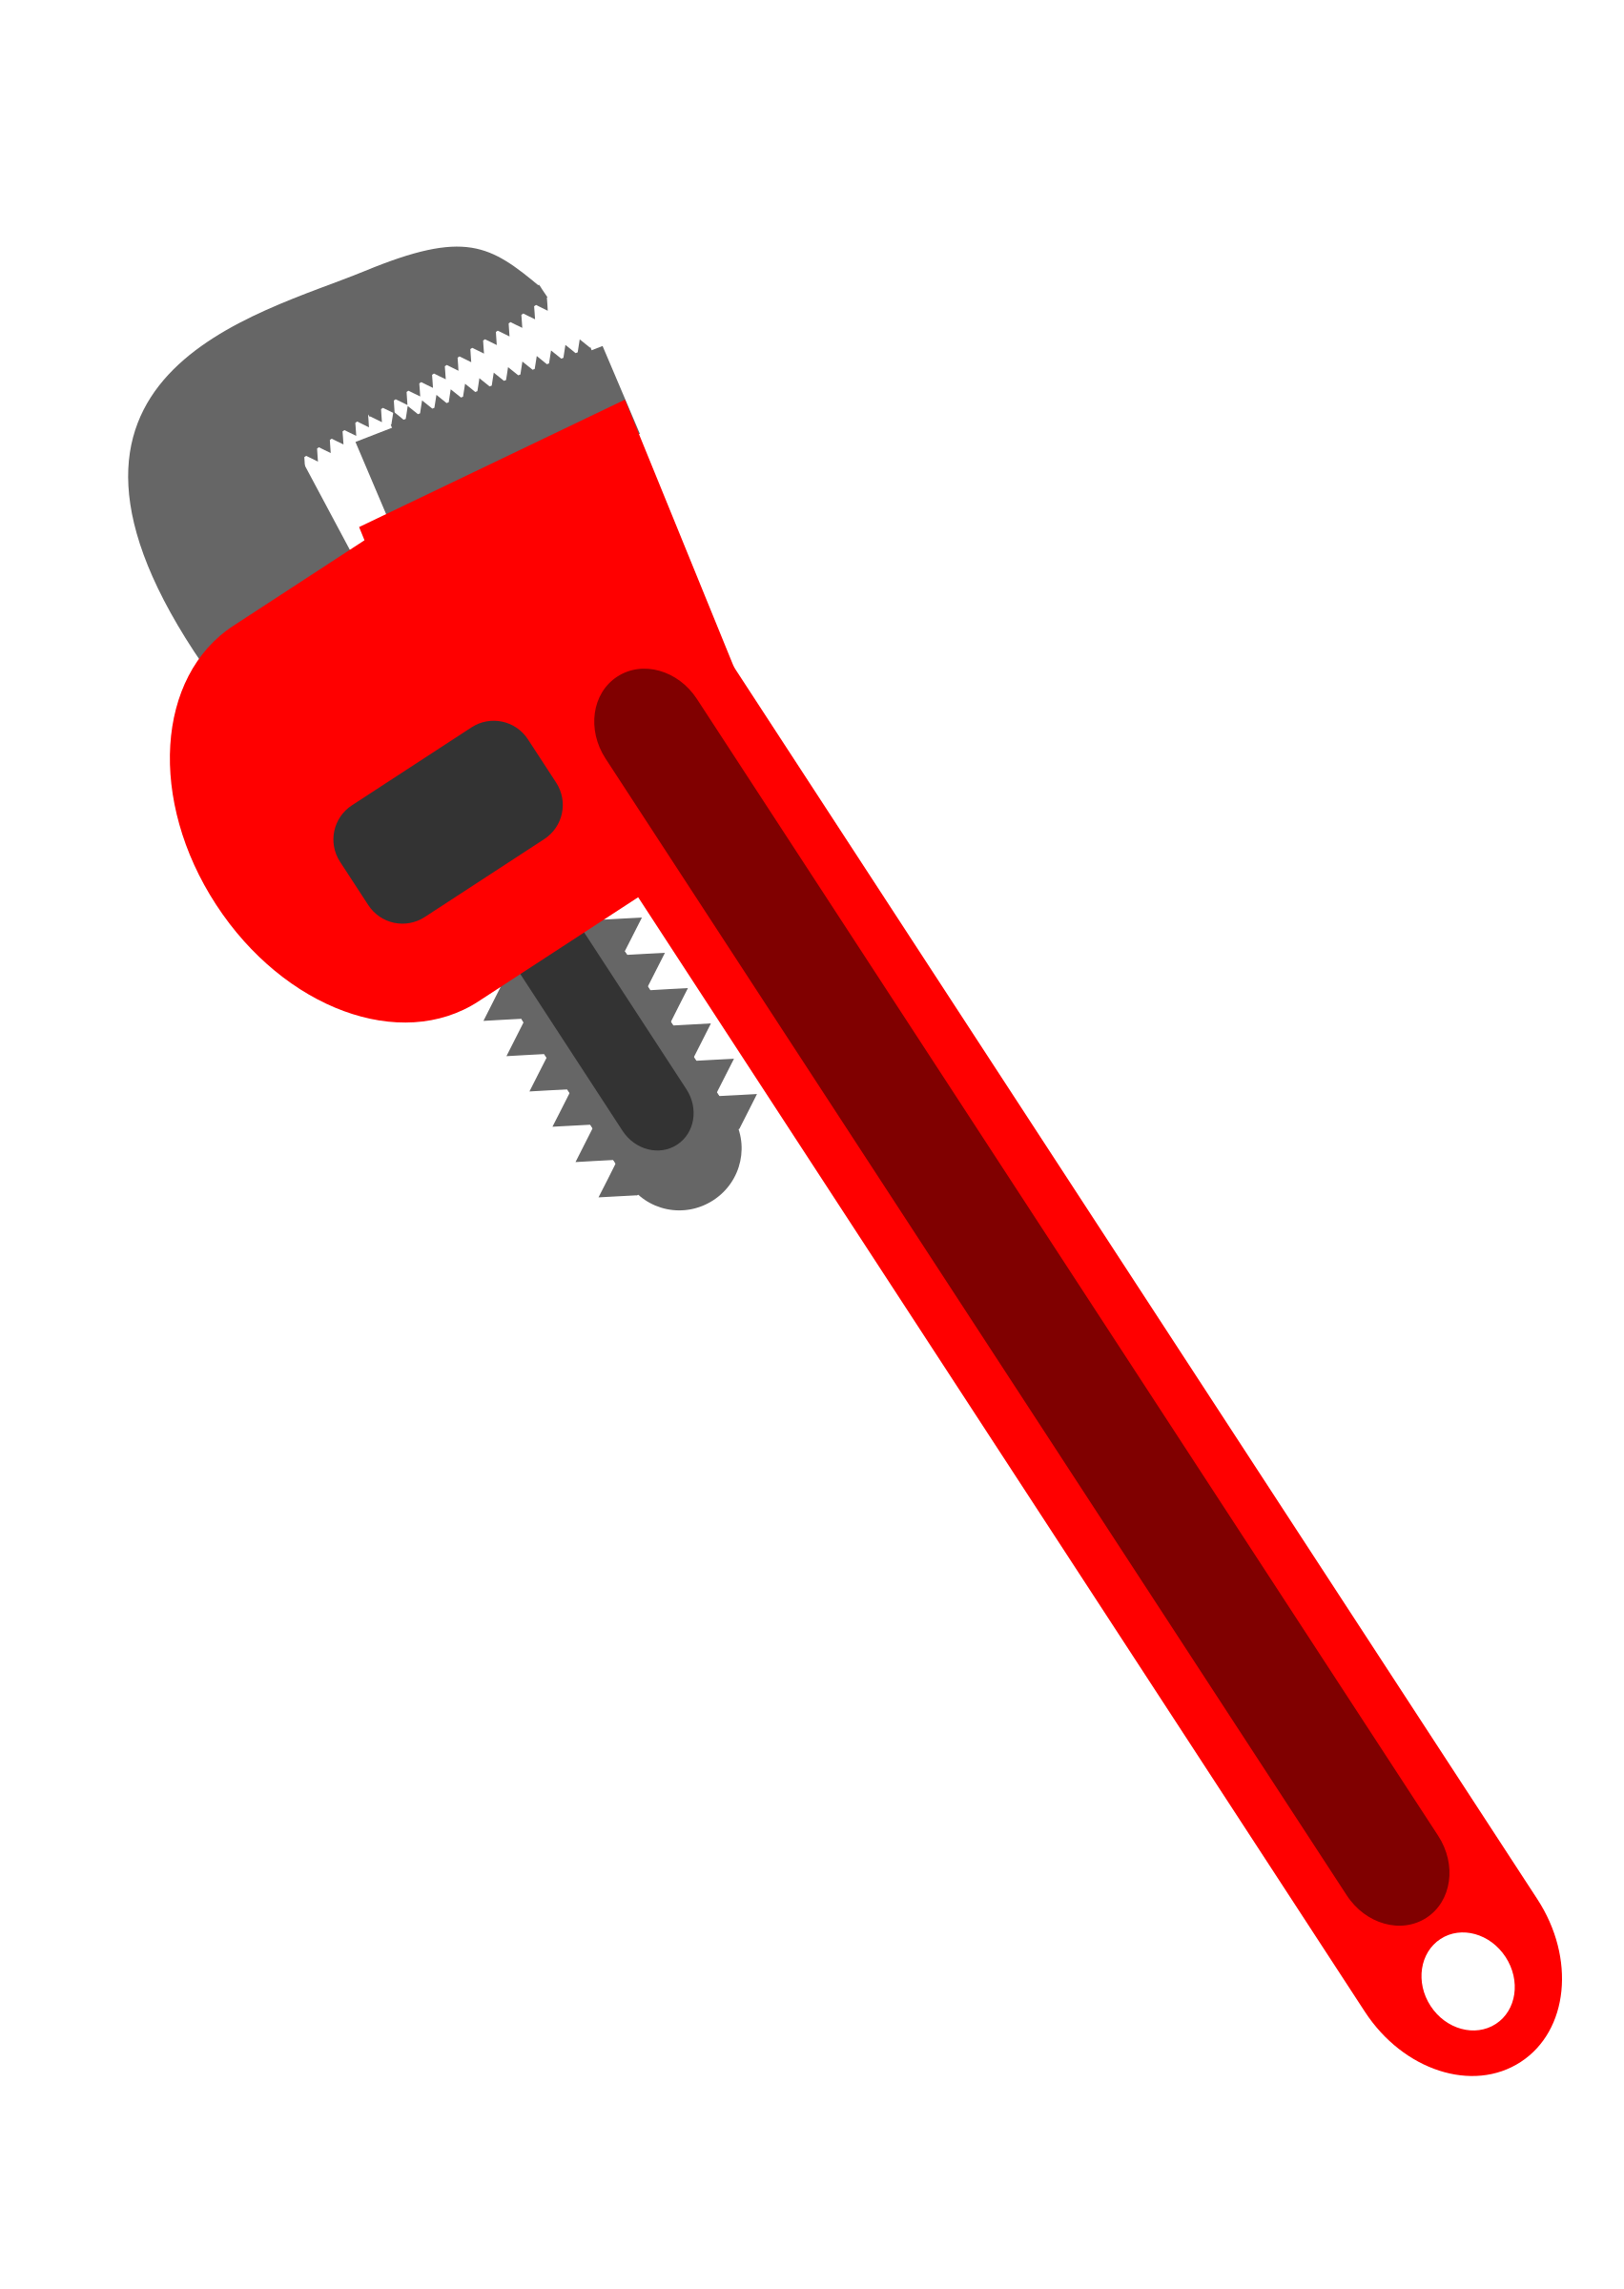 Plumber clipart icon. Plumbing faucet wrench decoration